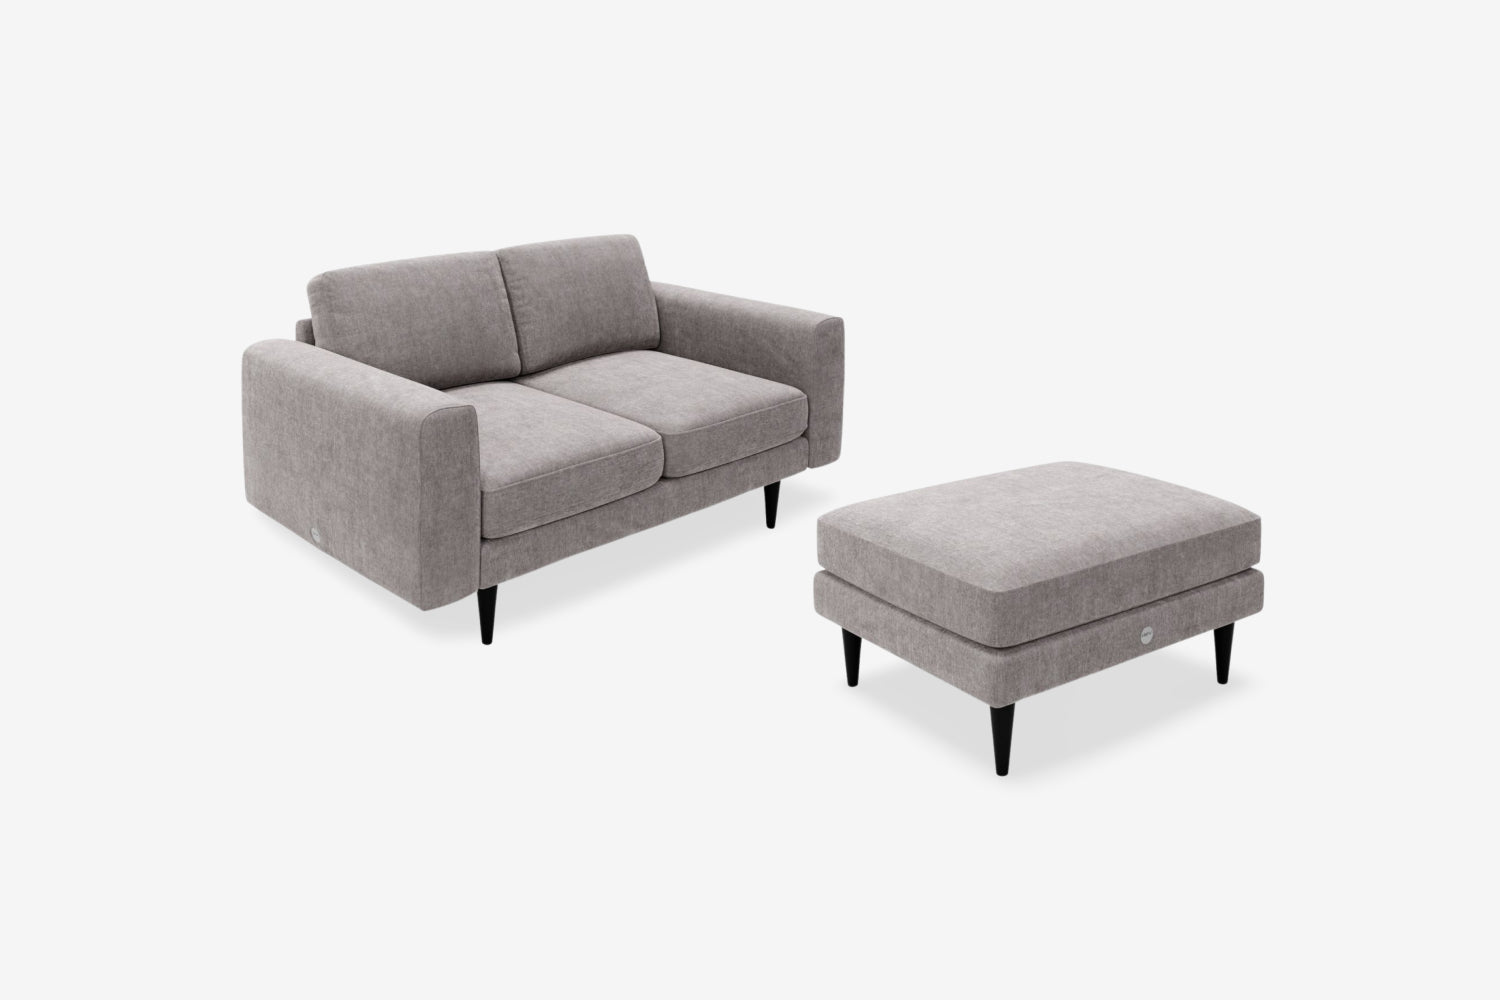 The Big Chill - 2 Seater Sofa and Footstool Set - Mid Grey